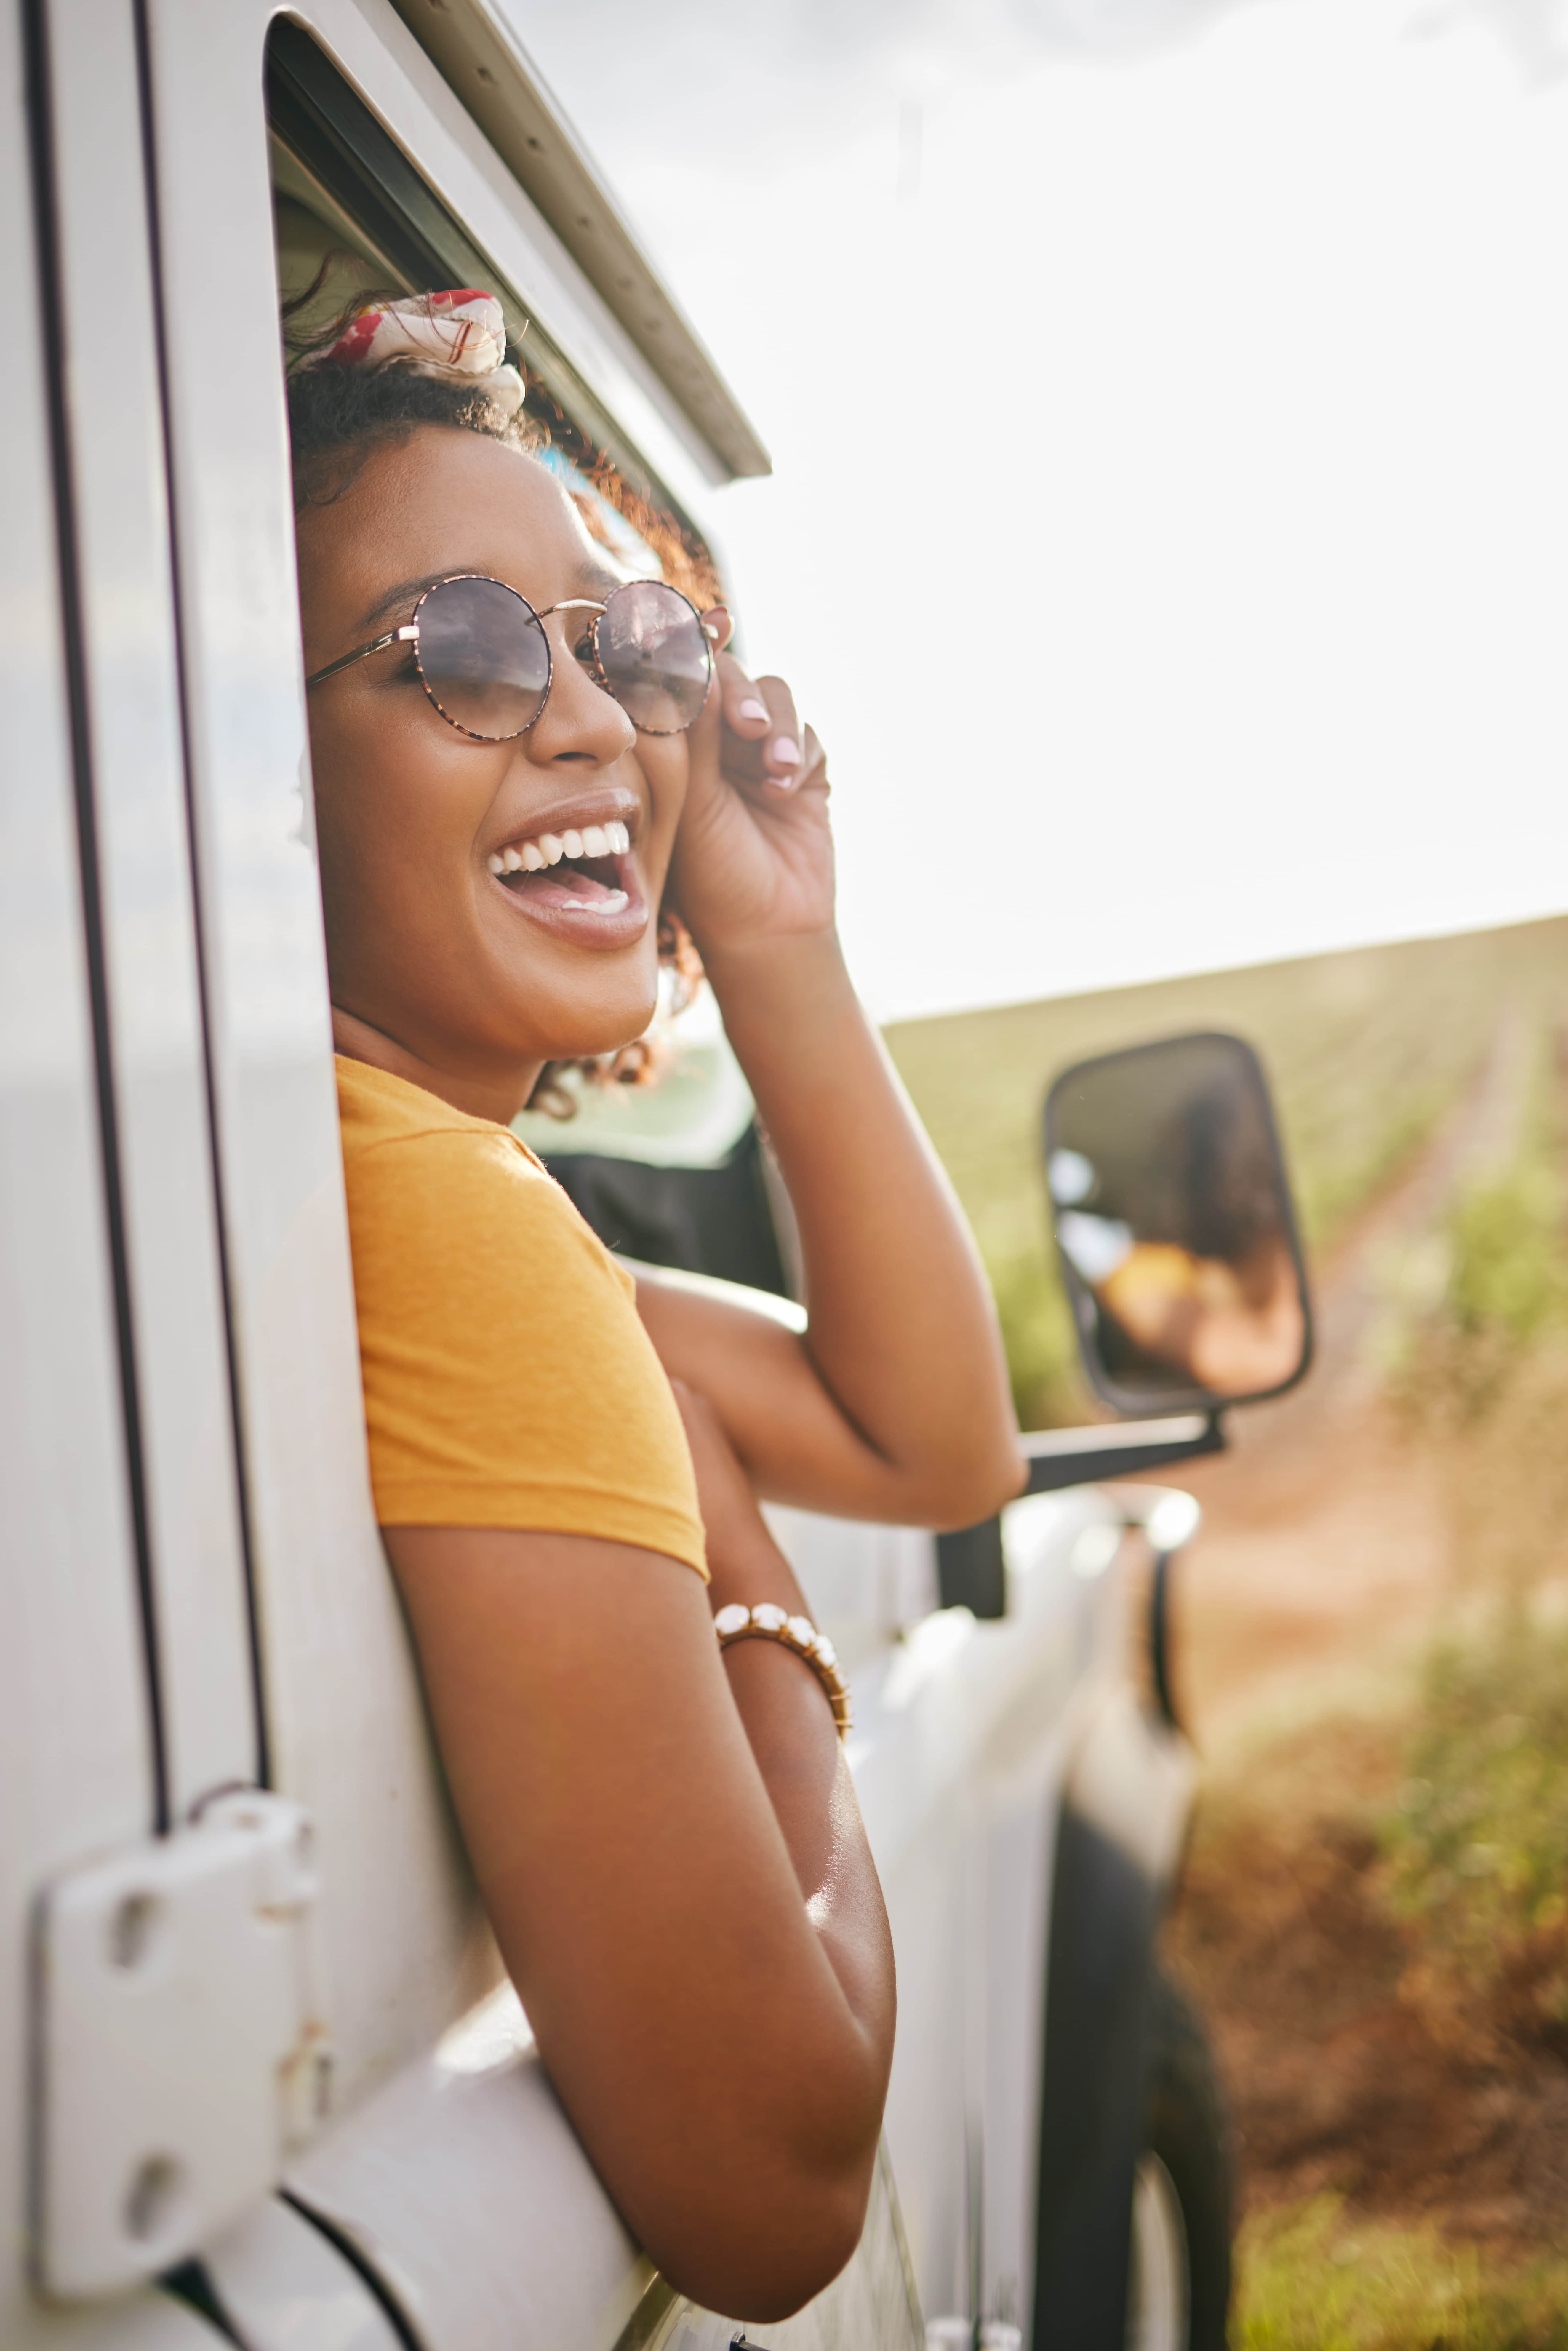 Is it good to refinance your auto loan? find out here.